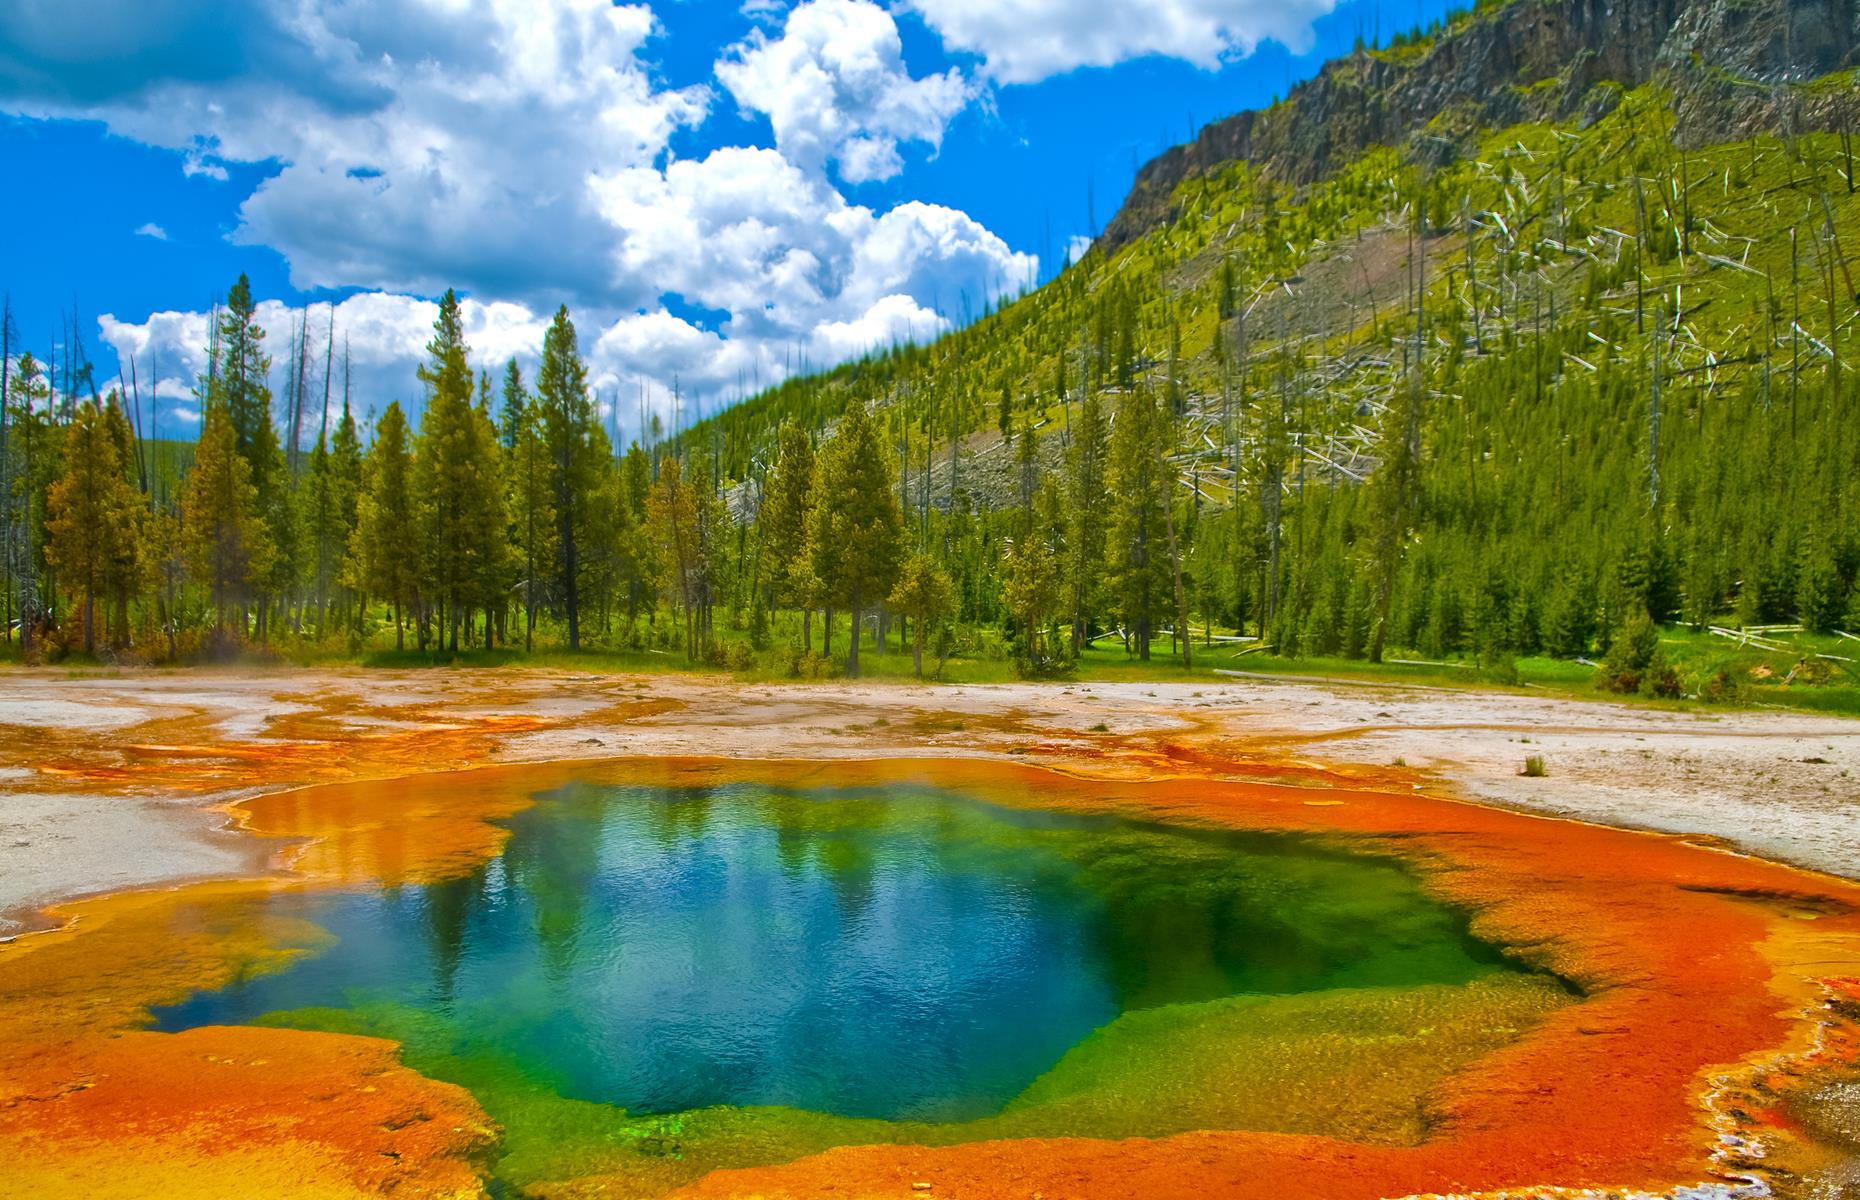 <p>Yellowstone National Park has the largest number of geysers and geothermal pools in the world and they are also among the most striking. They hiss, spurt and sparkle in vivid shades of blue, green, pink and yellow. Grand Prismatic Spring is the most famous example and can be viewed (at a safe distance) from an overlook.</p>  <p><strong><a href="https://www.loveexploring.com/news/76305/of-bison-and-bears-why-yellowstone-reminds-us-of-our-place-on-the-planet">Of bison and bears: why Yellowstone is an important reminder of our place on the planet</a></strong></p>